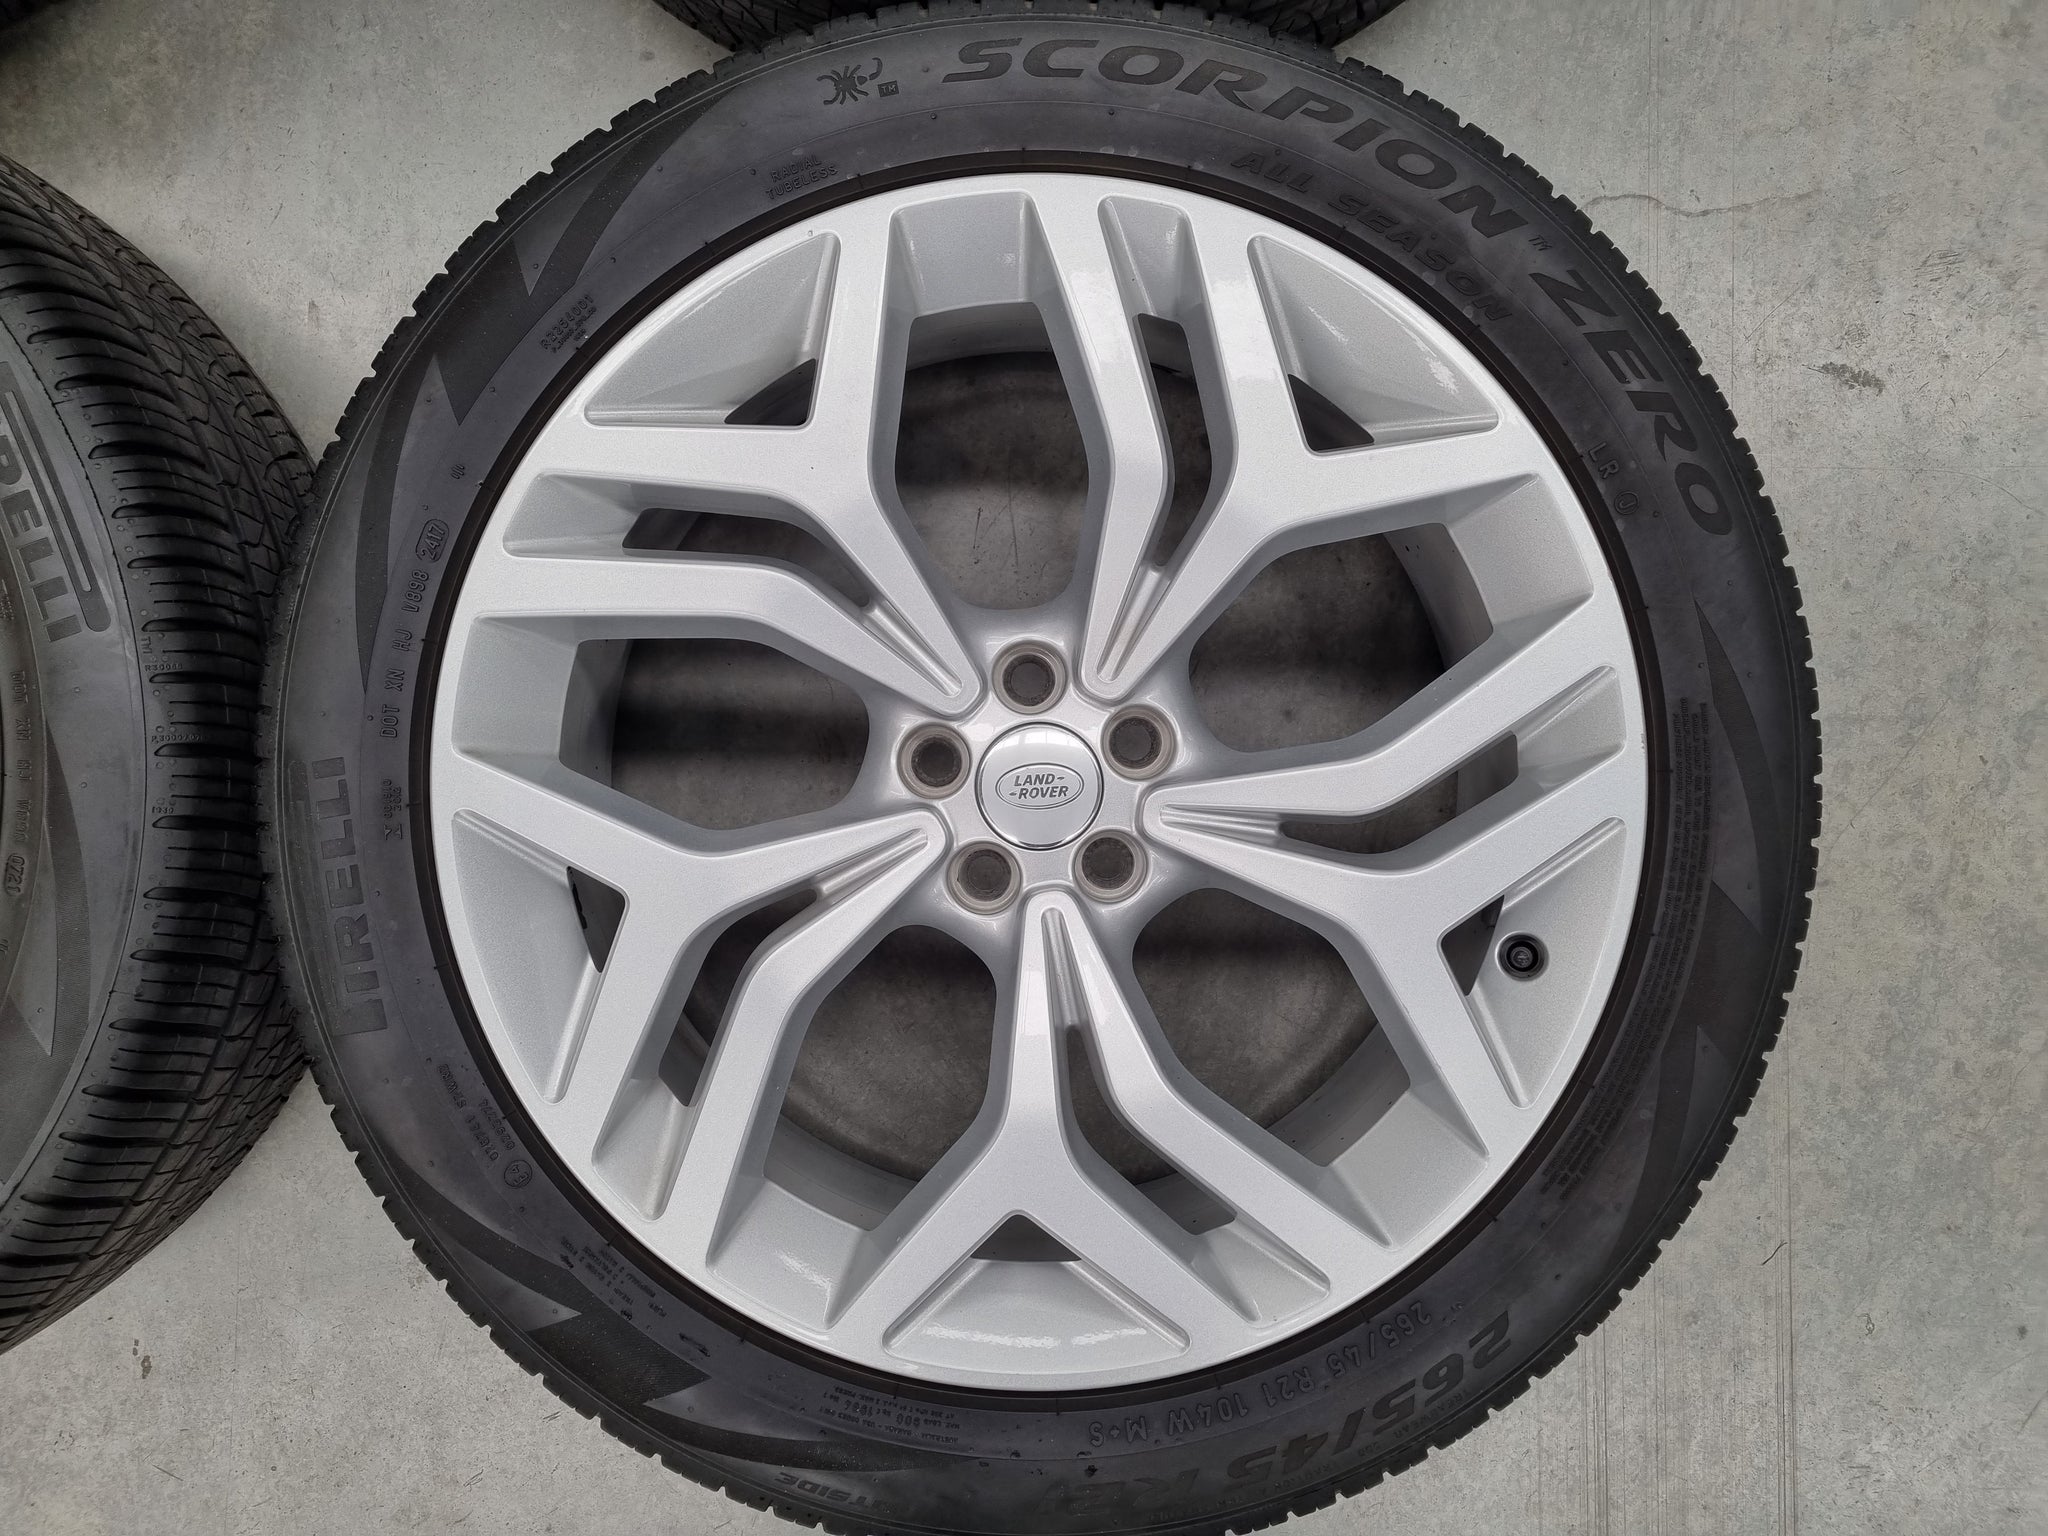 Load image into Gallery viewer, Genuine Range Rover Velar Silver 21 Inch Wheels and Tyres Set of 4
